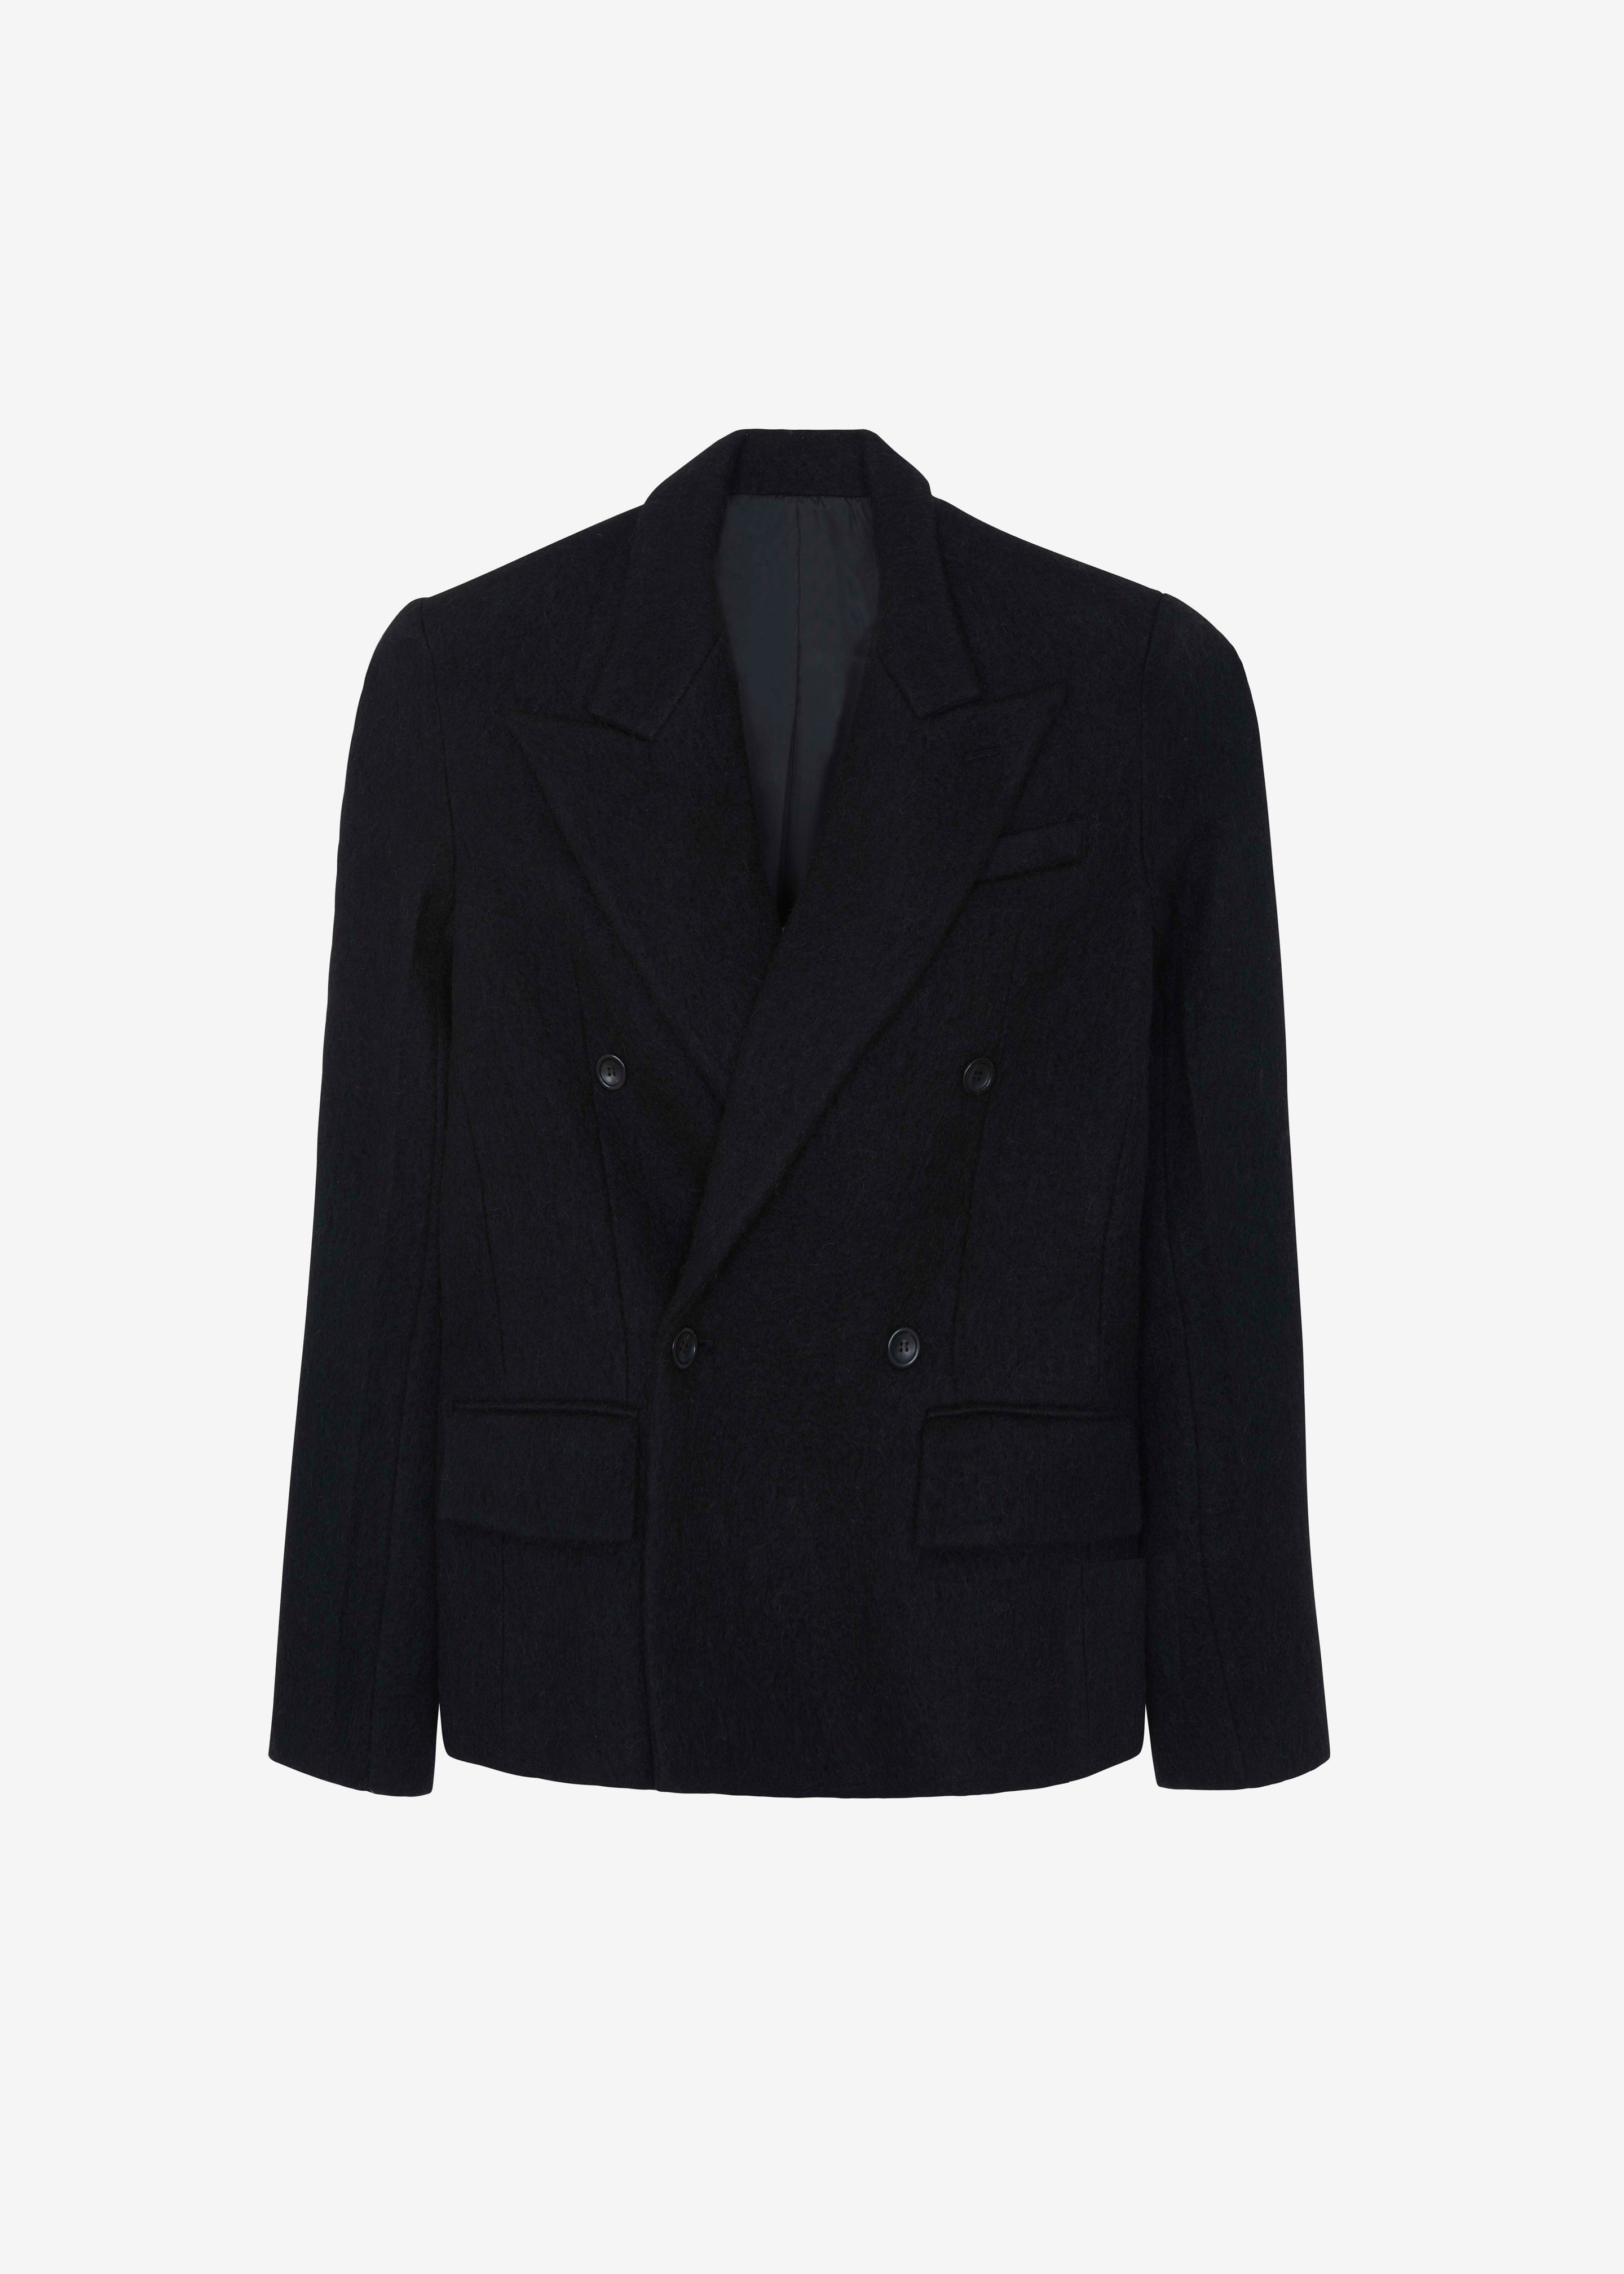 Keira Double Breasted Wool Blazer - Black - 9